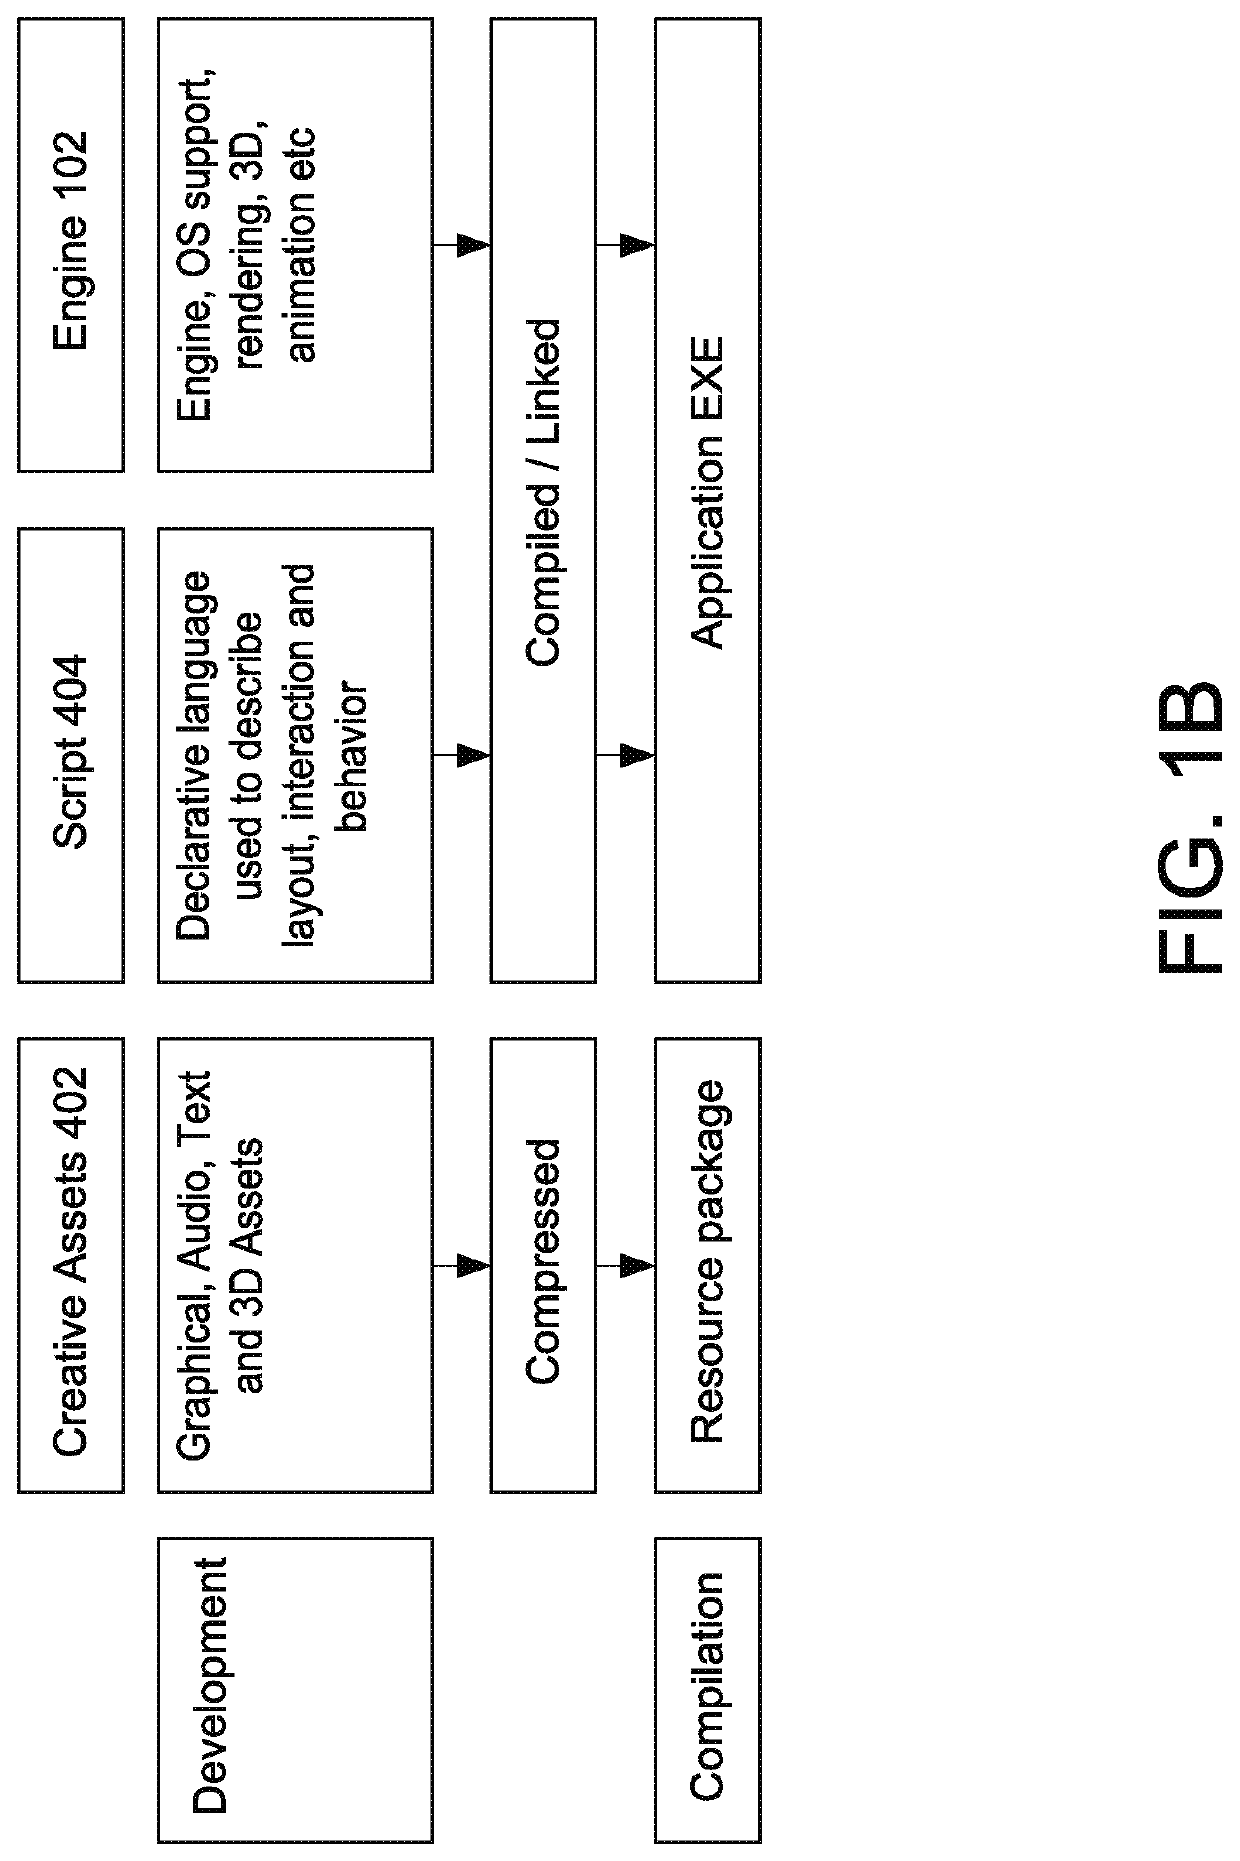 Server kit configured to marshal resource calls and methods therefor